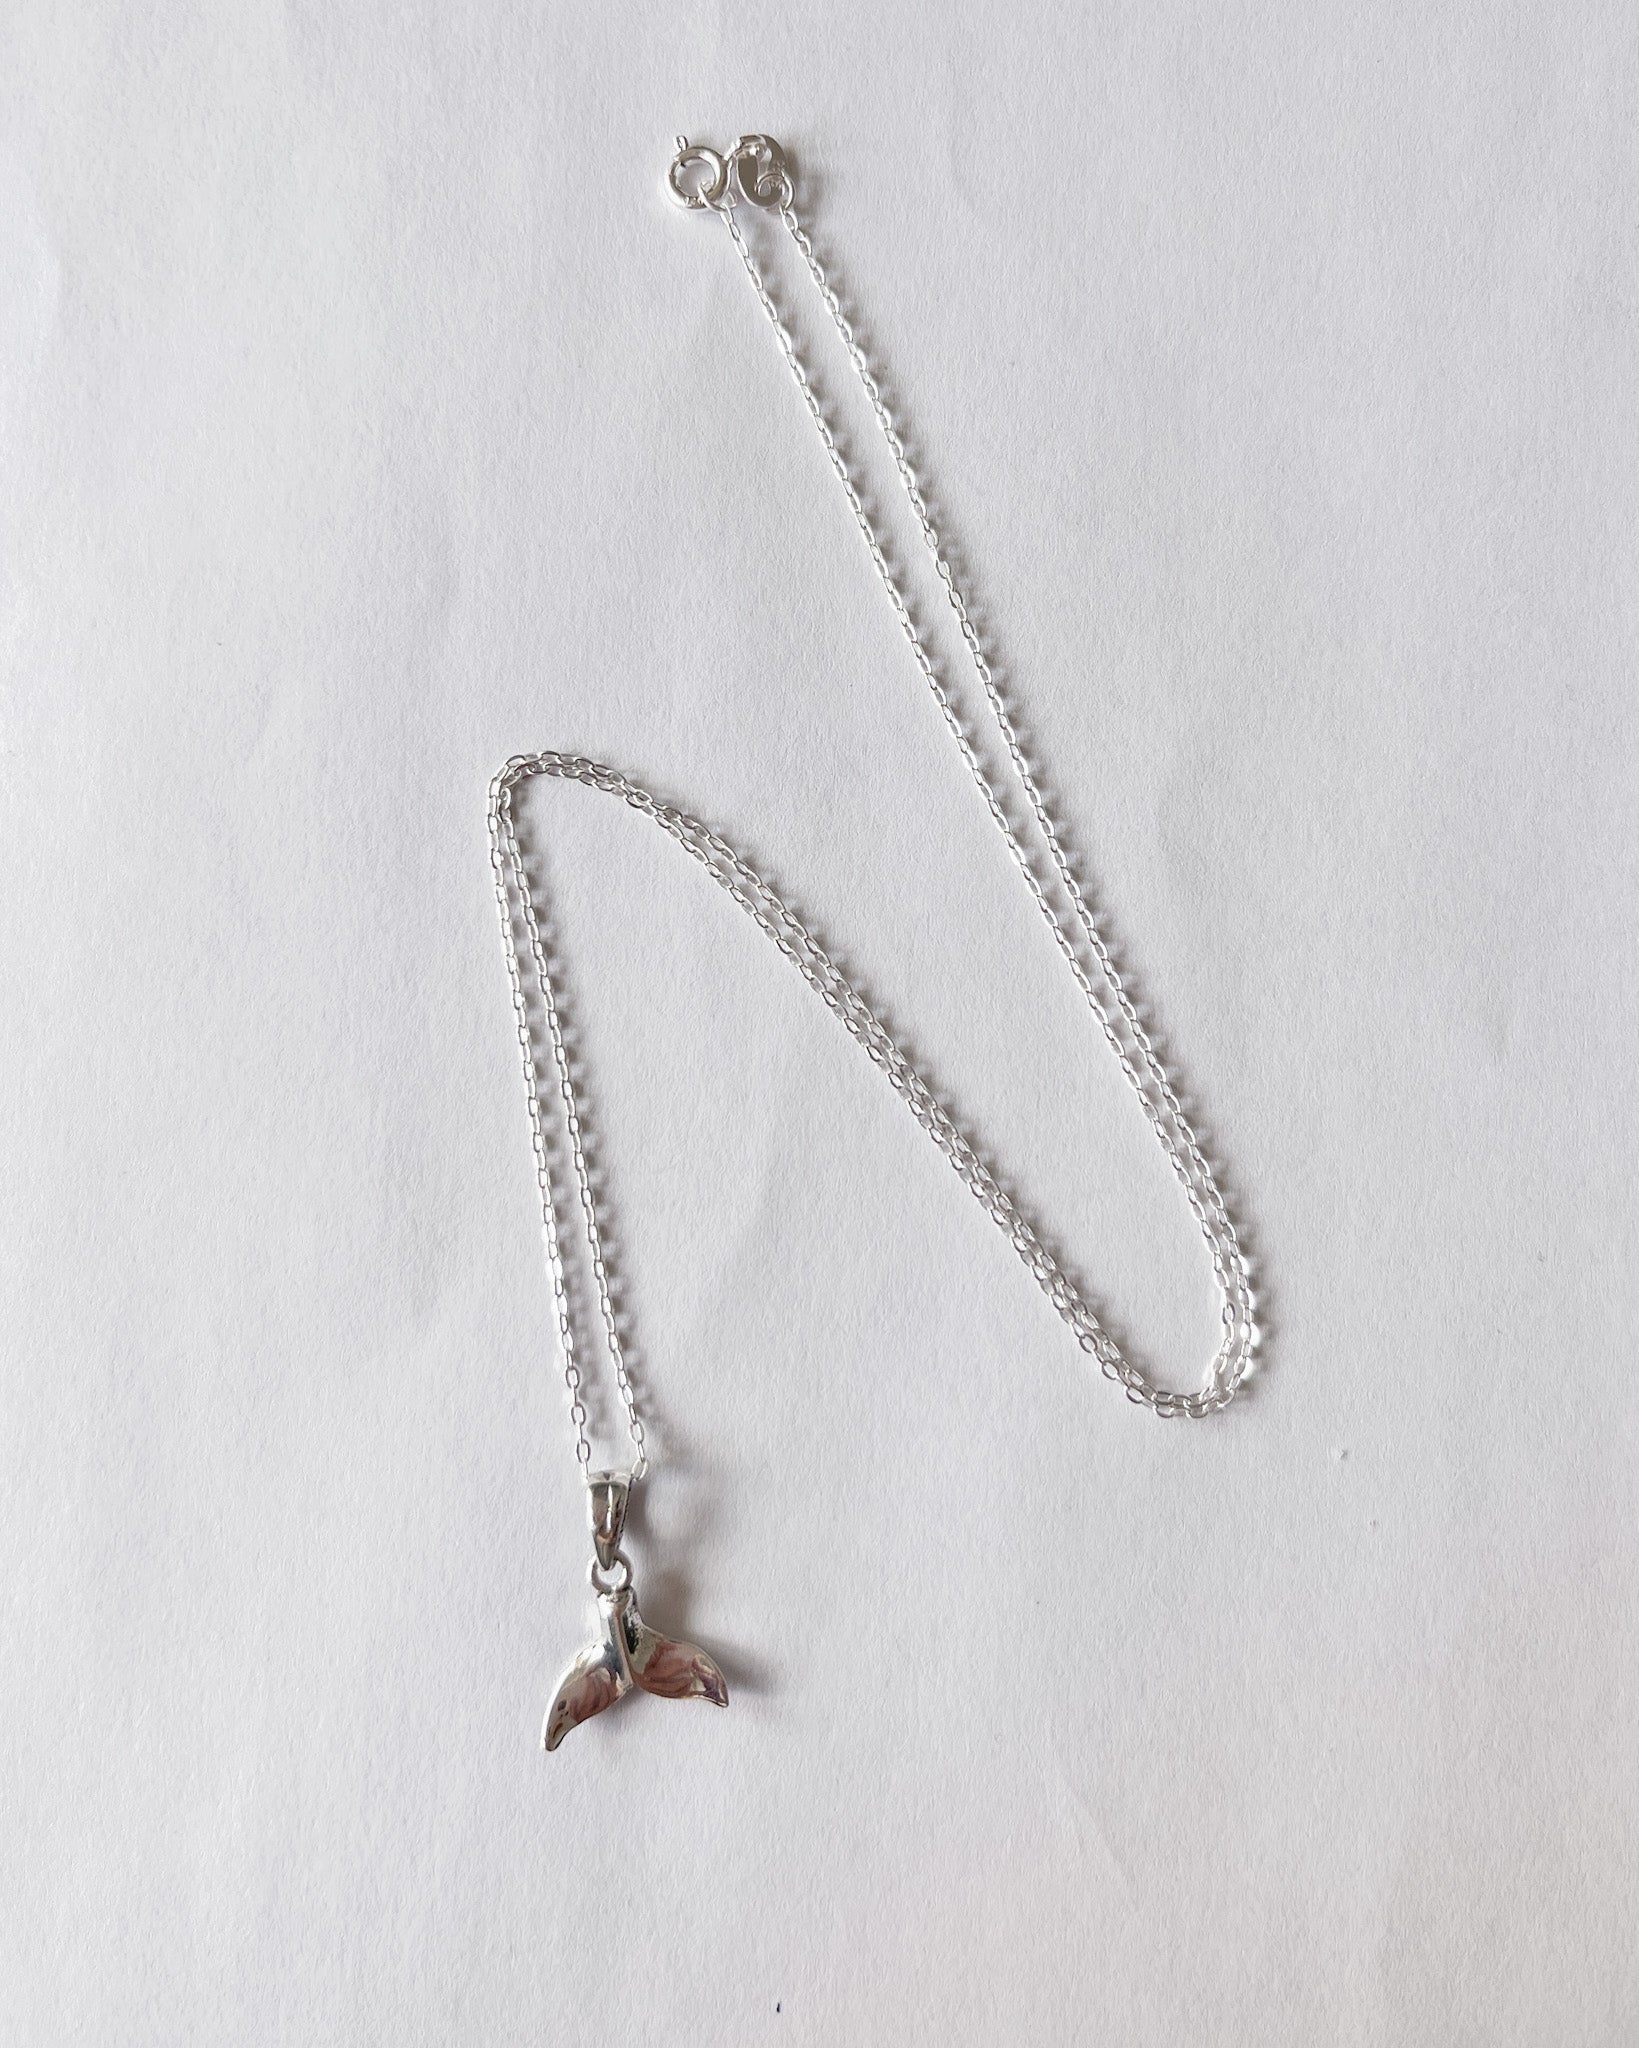 Whale tail ~ Necklace